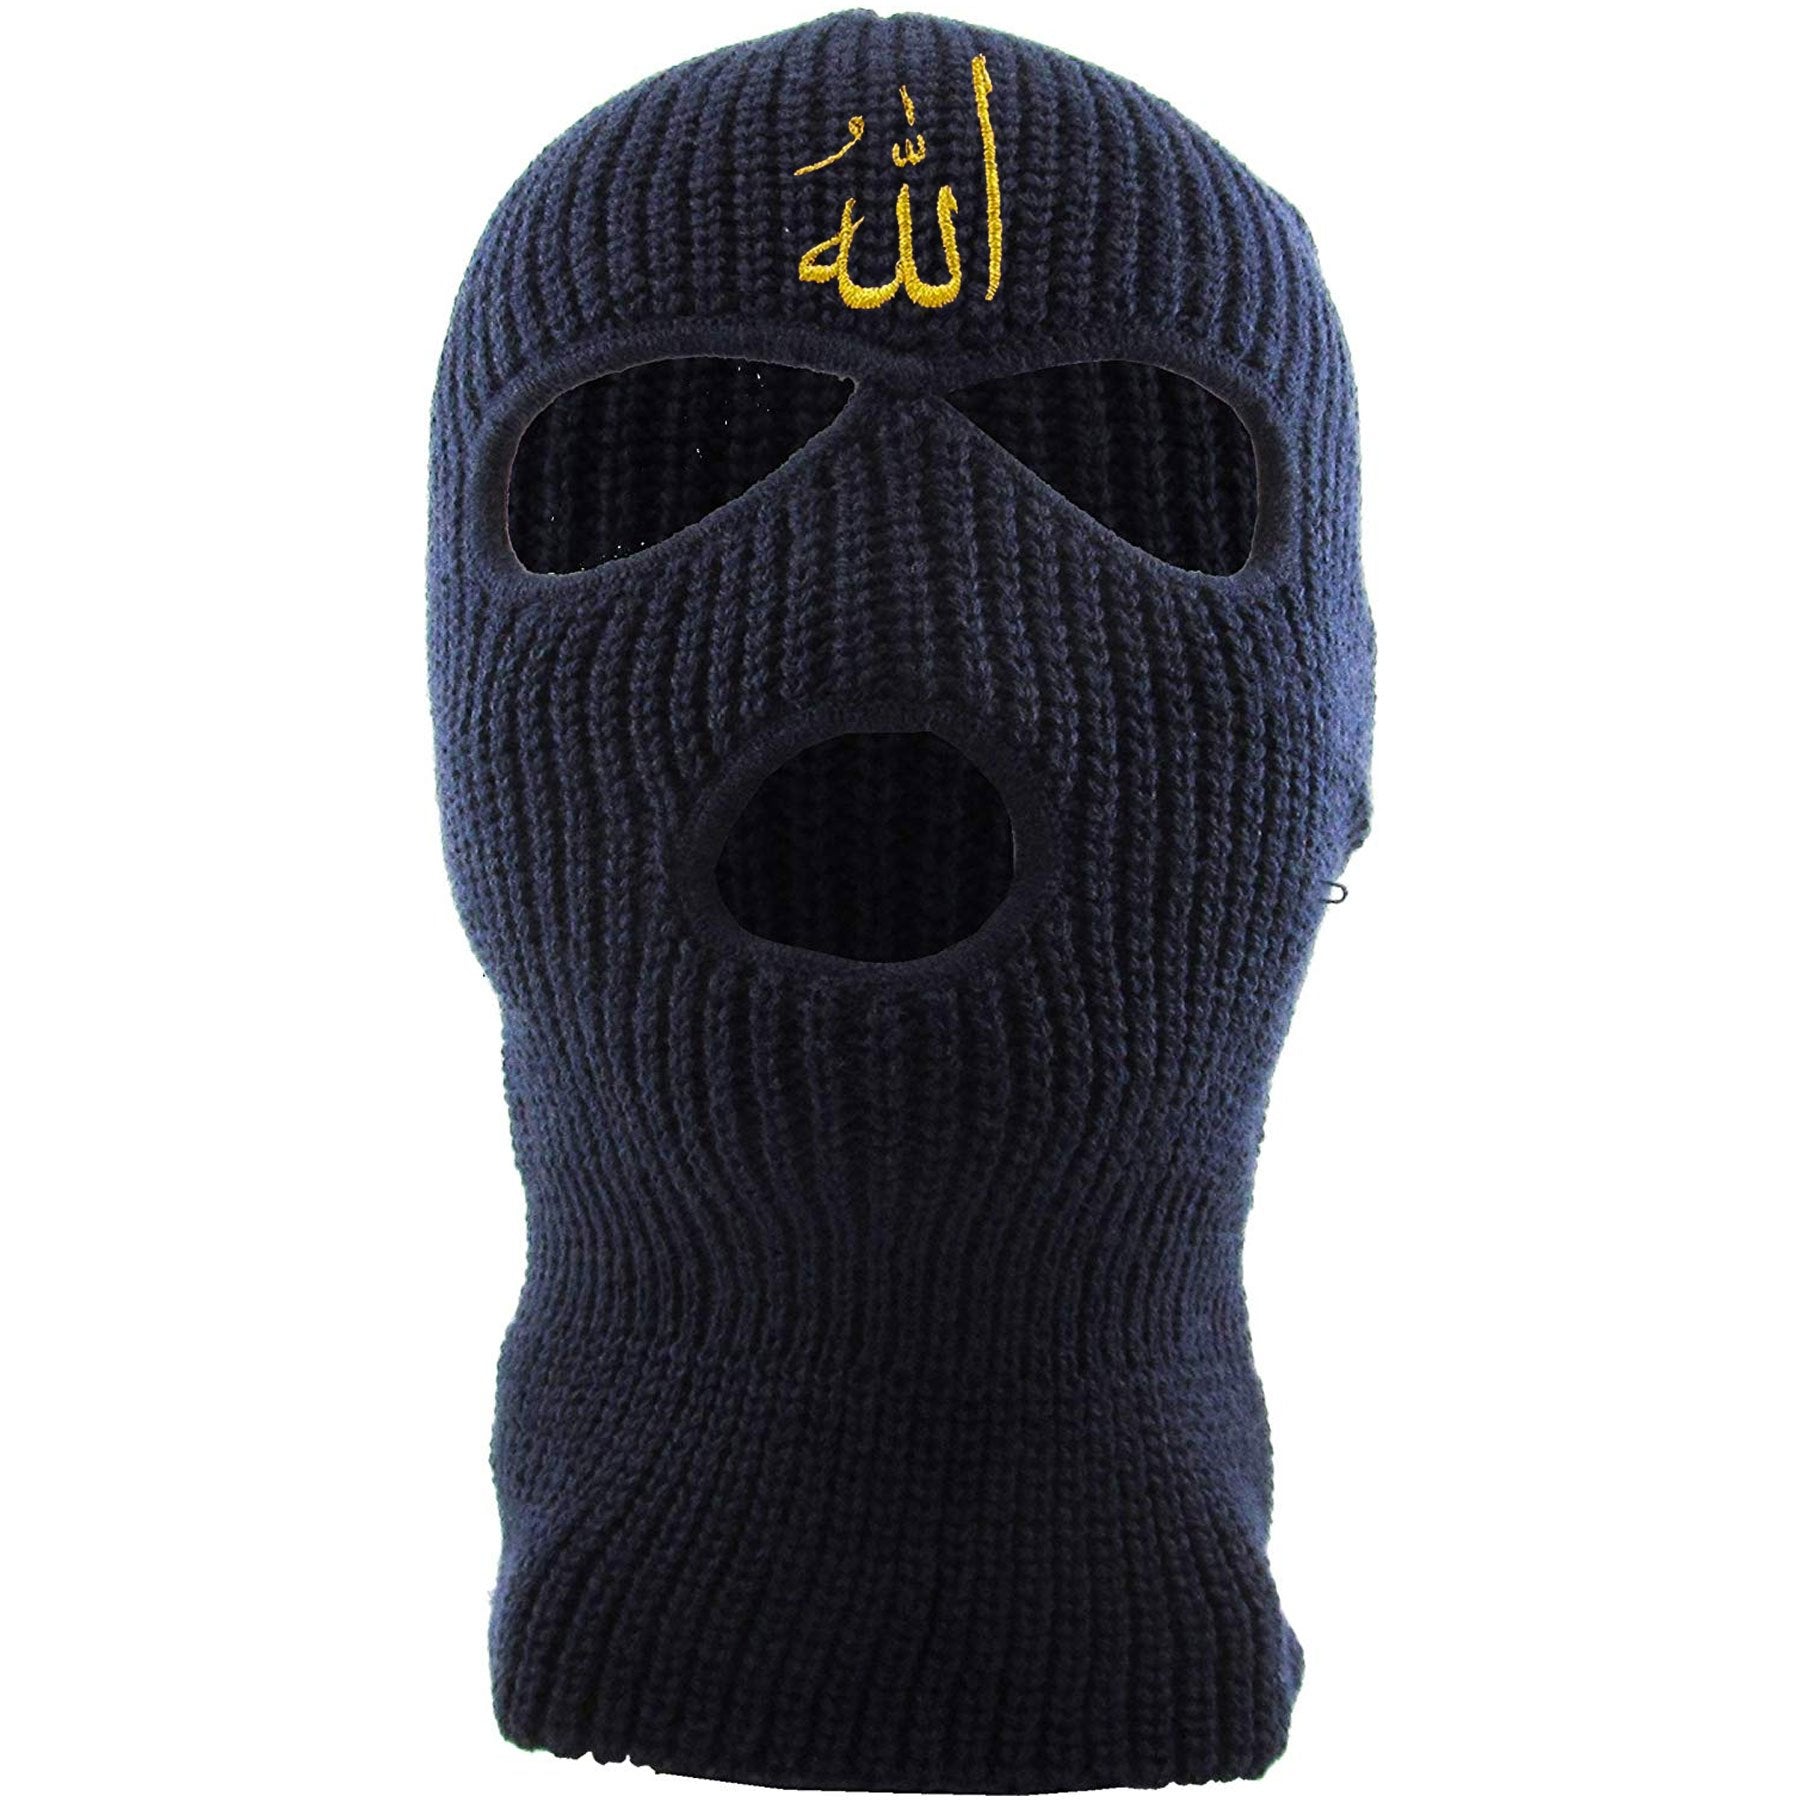 Embroidered on the front of the navy Allah ski mask is the arabic writing for the word allah